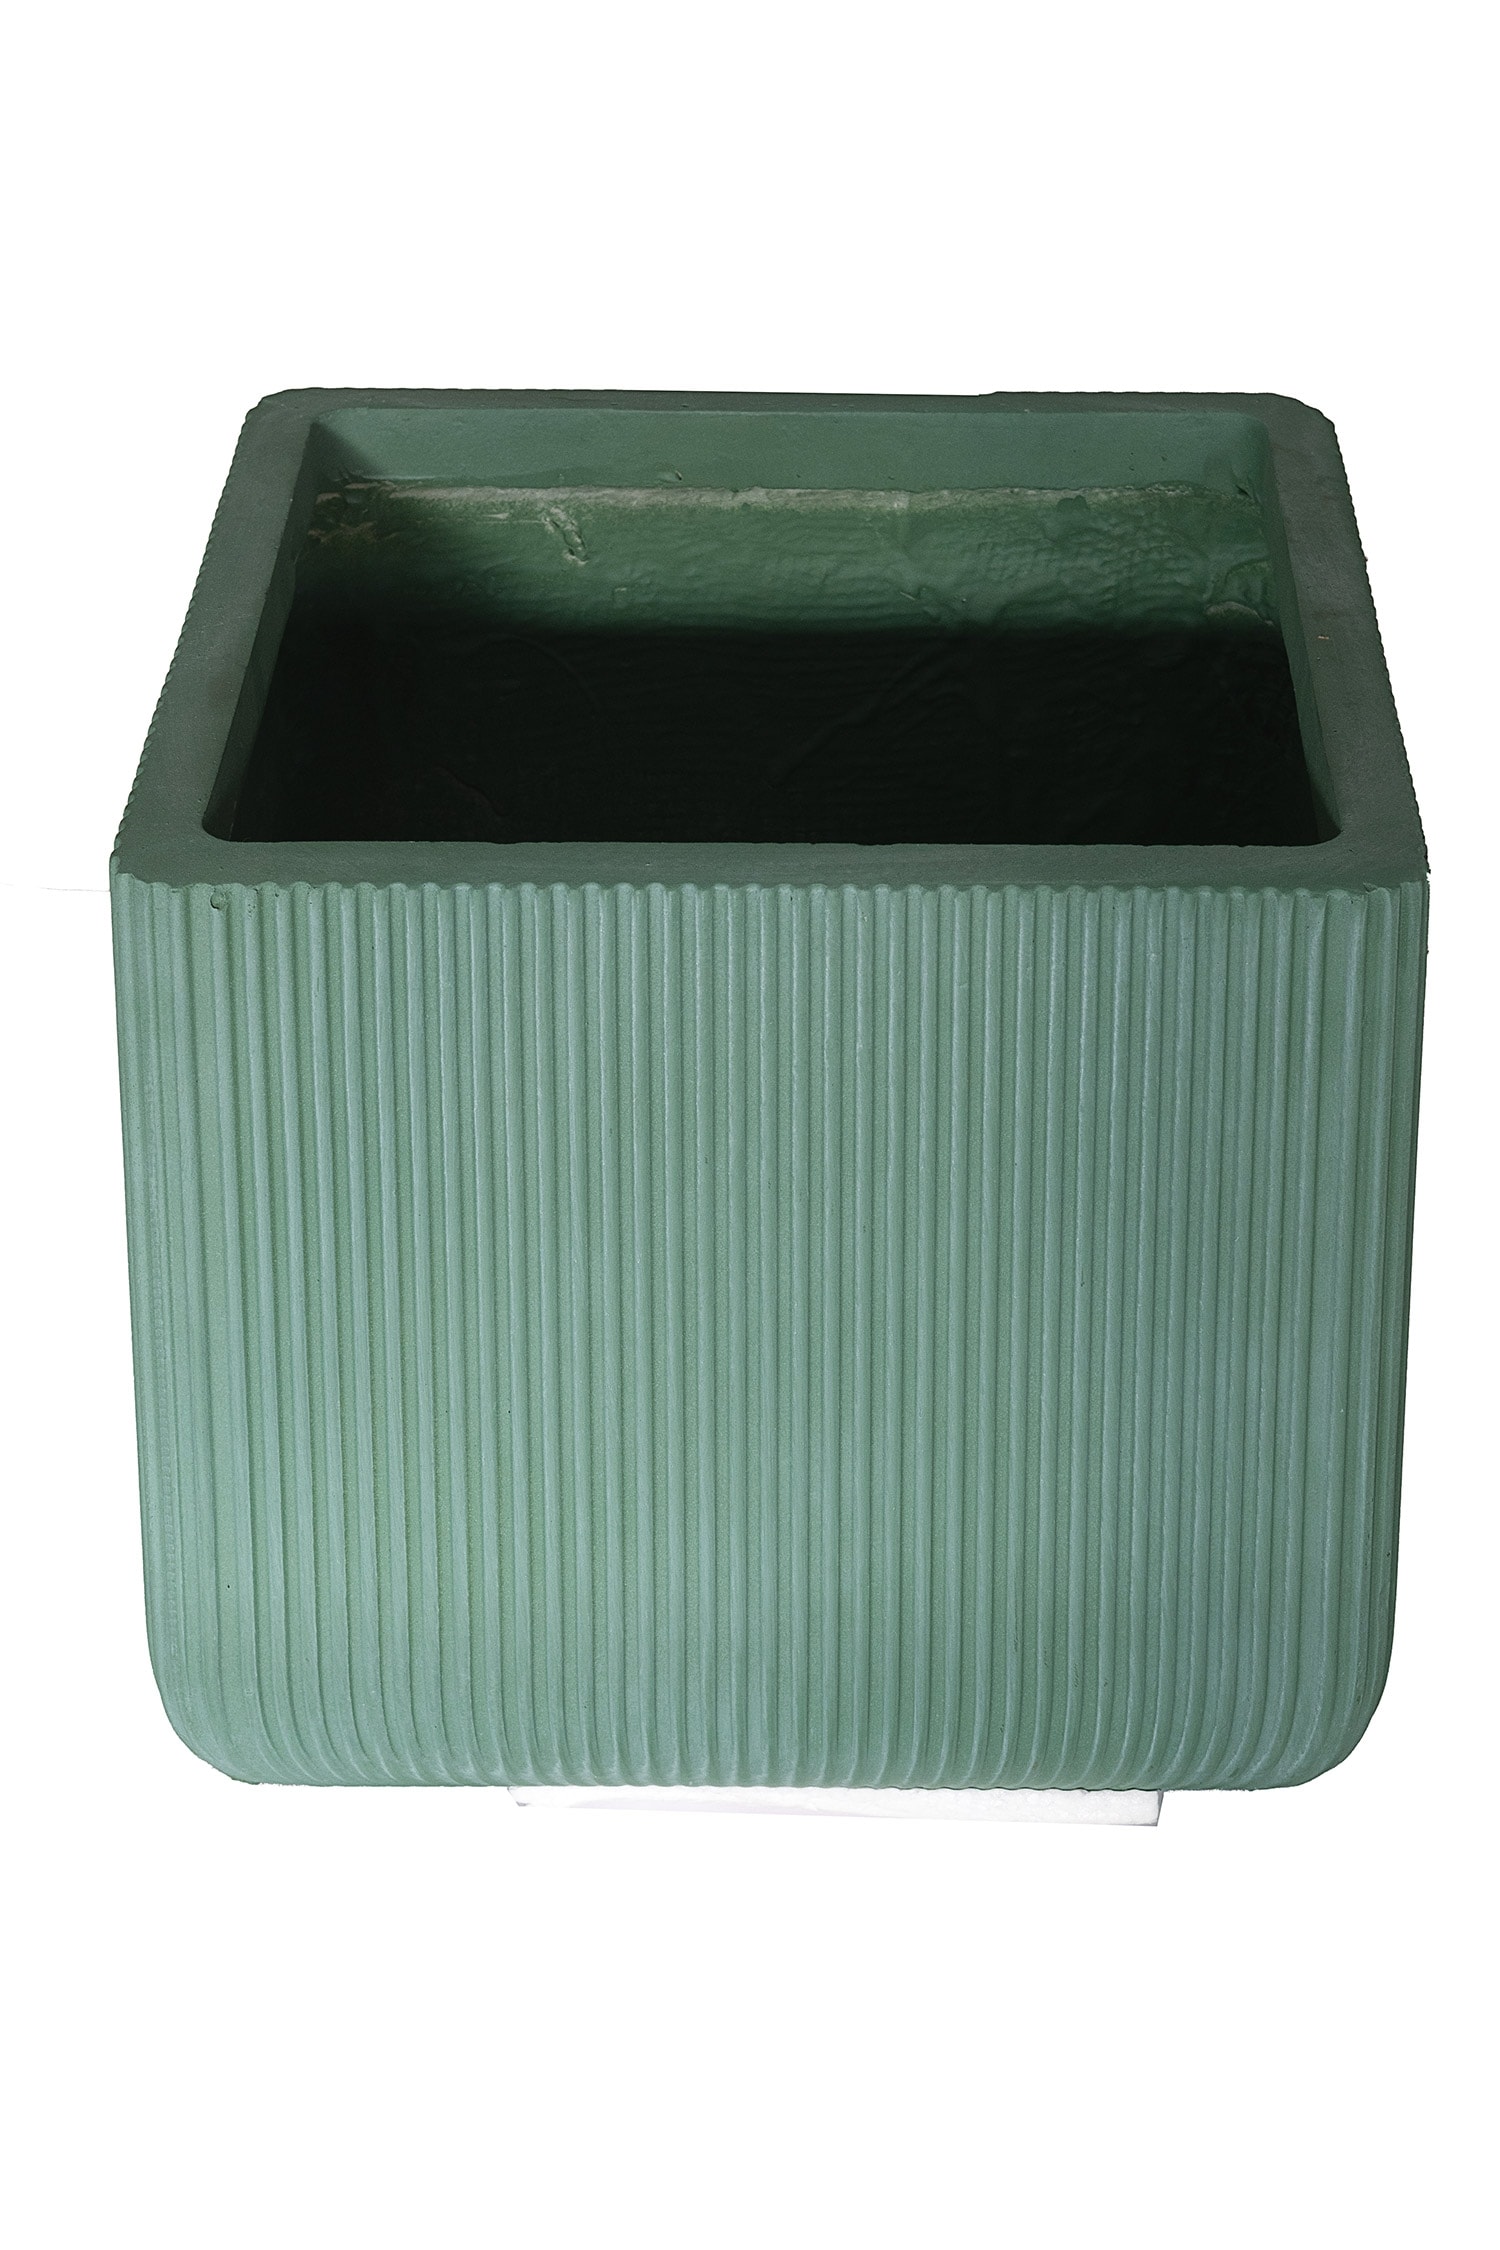 H2H - Green Frp Ribbed Square Planter